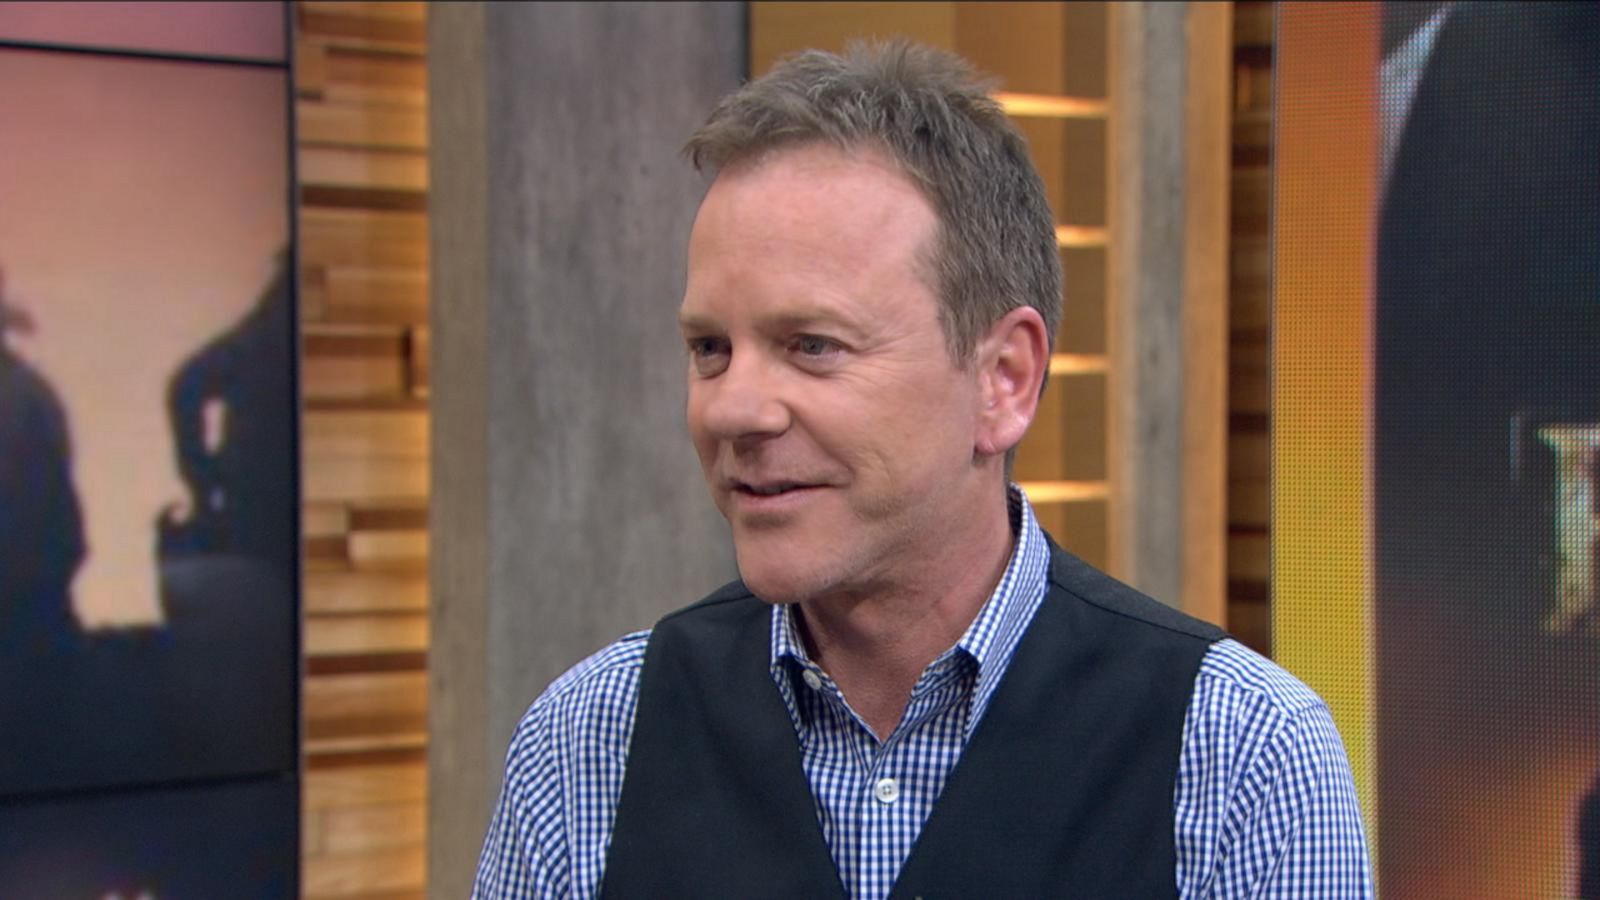 Kiefer Sutherland Opens Up About Acting With His Dad Good Morning America